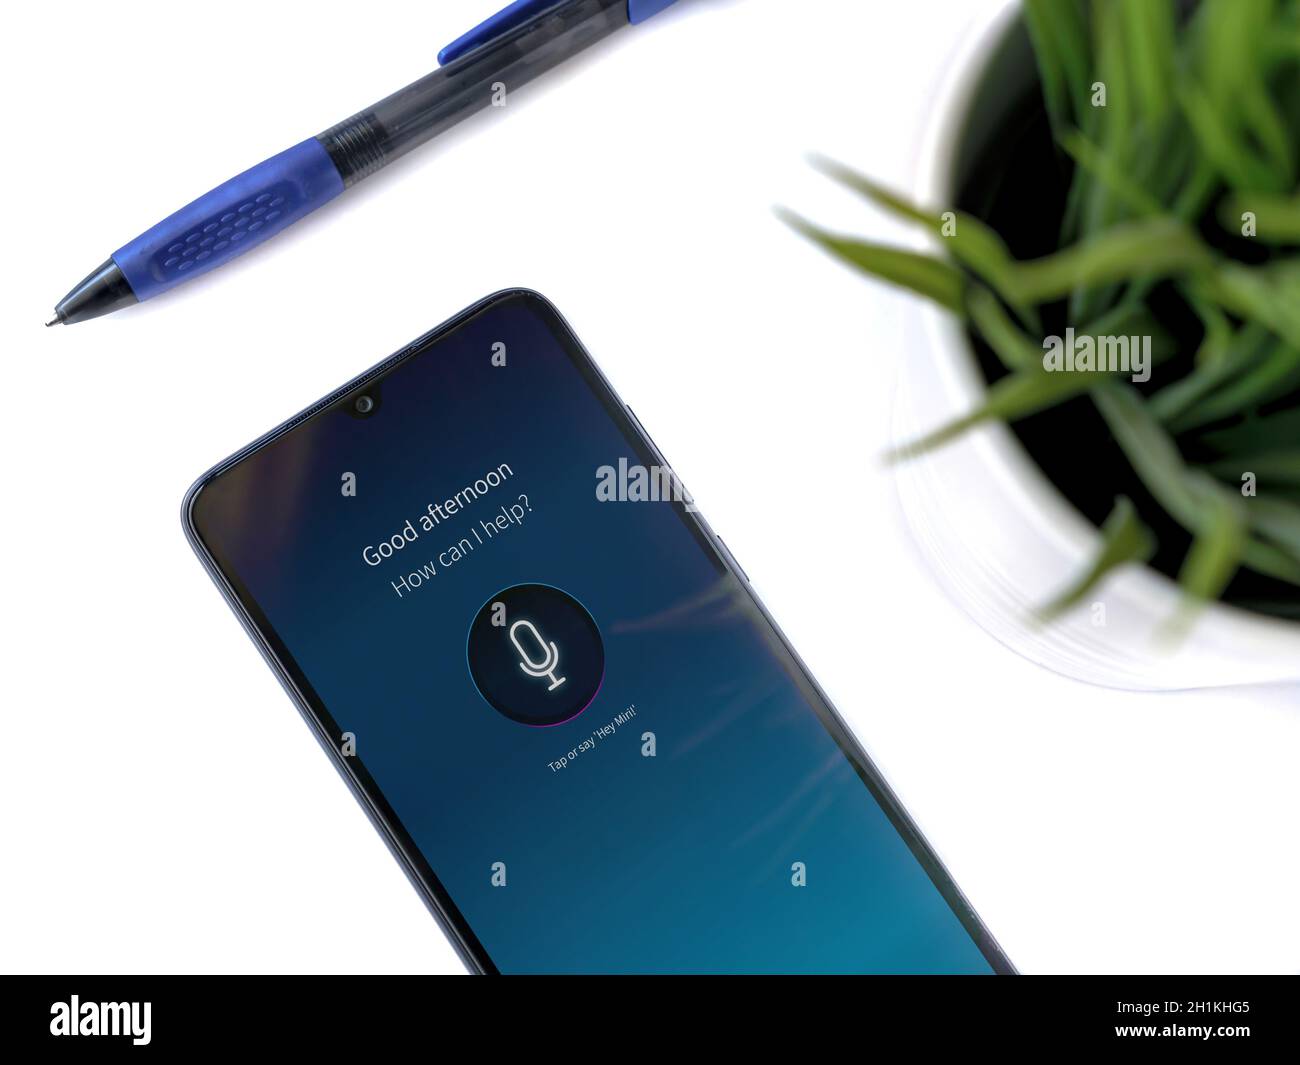 Lod, Israel - July 8, 2020: Modern minimalist office workspace with black mobile smartphone with Miri app launch screen with logo on white background. Stock Photo